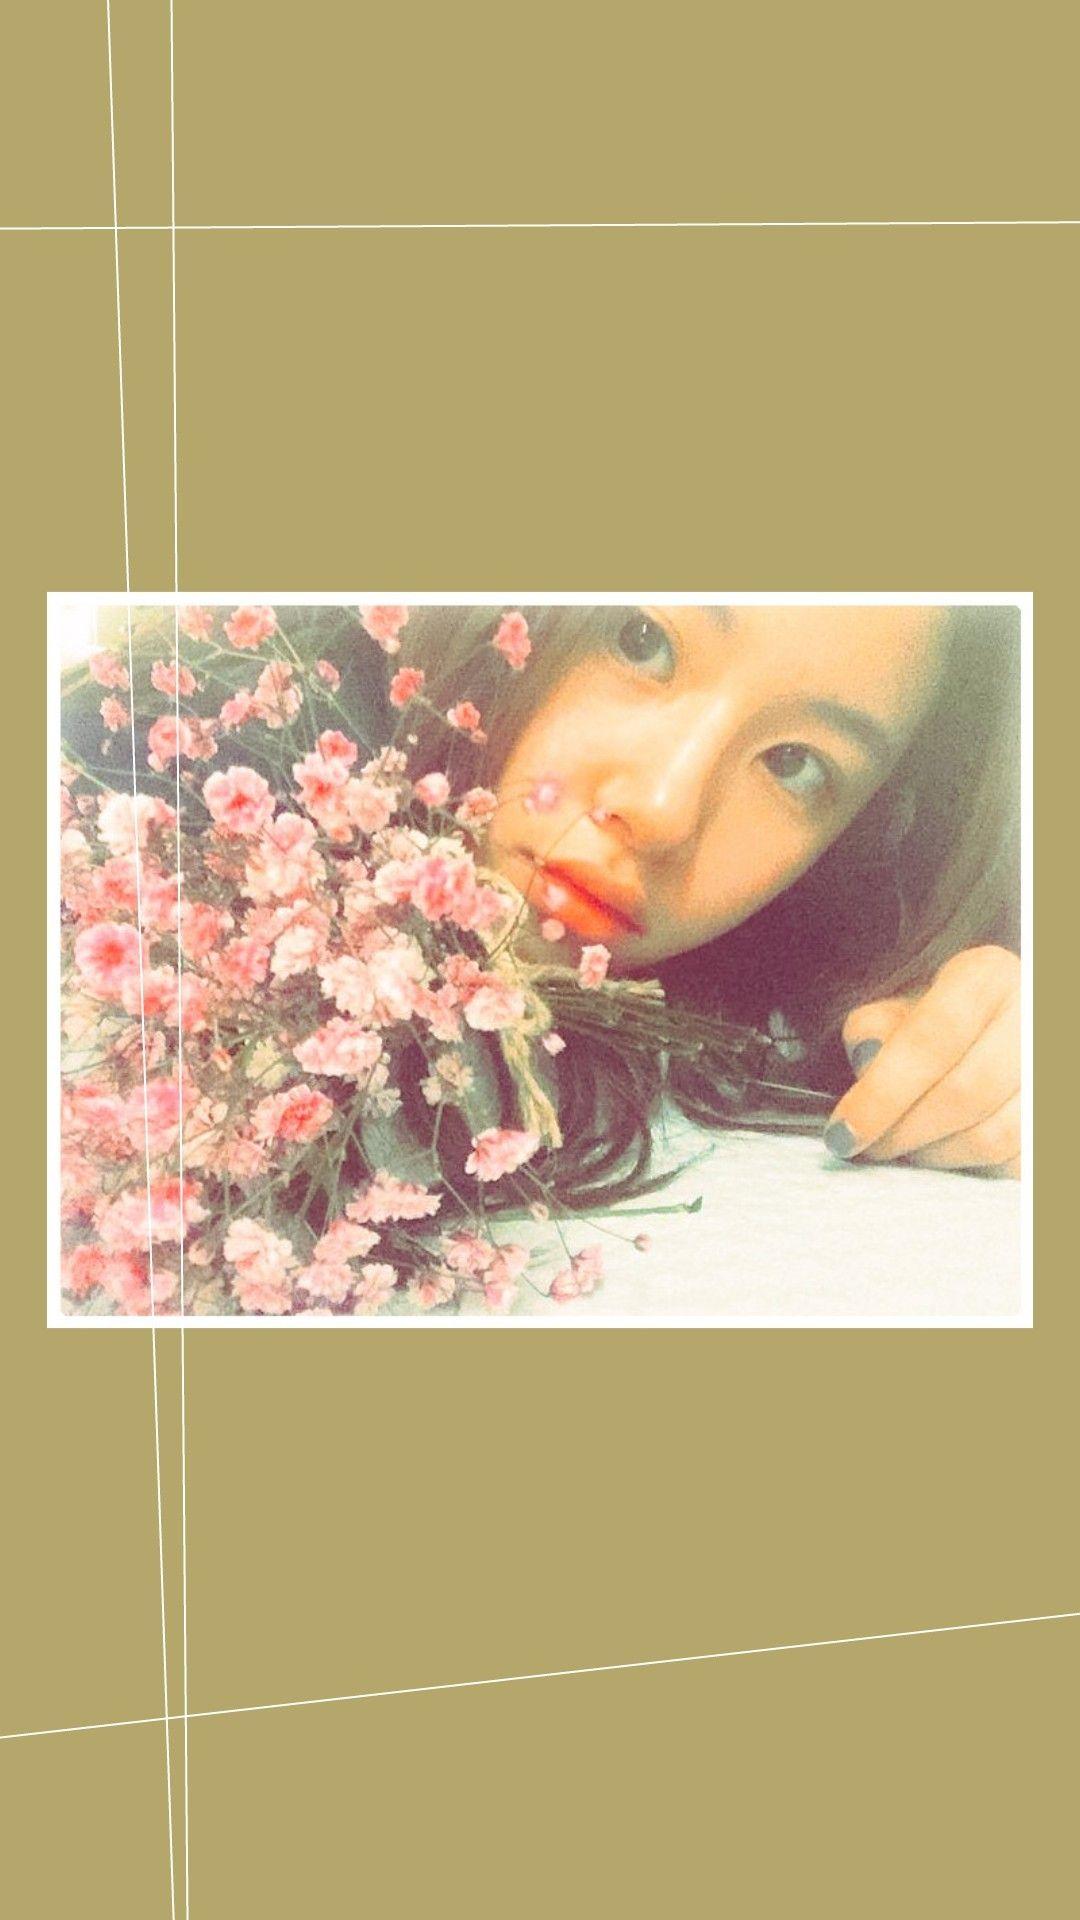 son chaeyoung wallpaper hashtag Image on Tumblr